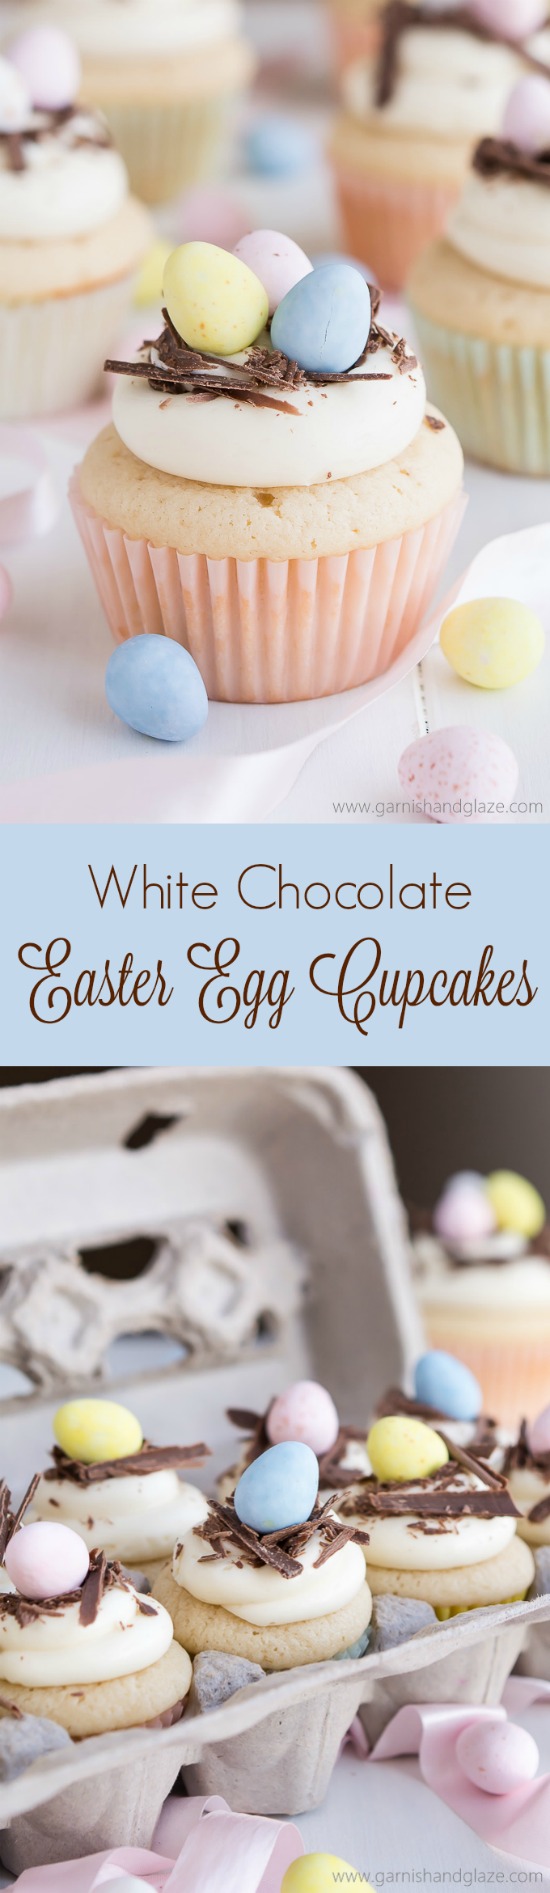 With a moist fluffy cake and rich white chocolate frosting, these adorable White Chocolate Easter Egg Cupcakes are sure to be a hit!